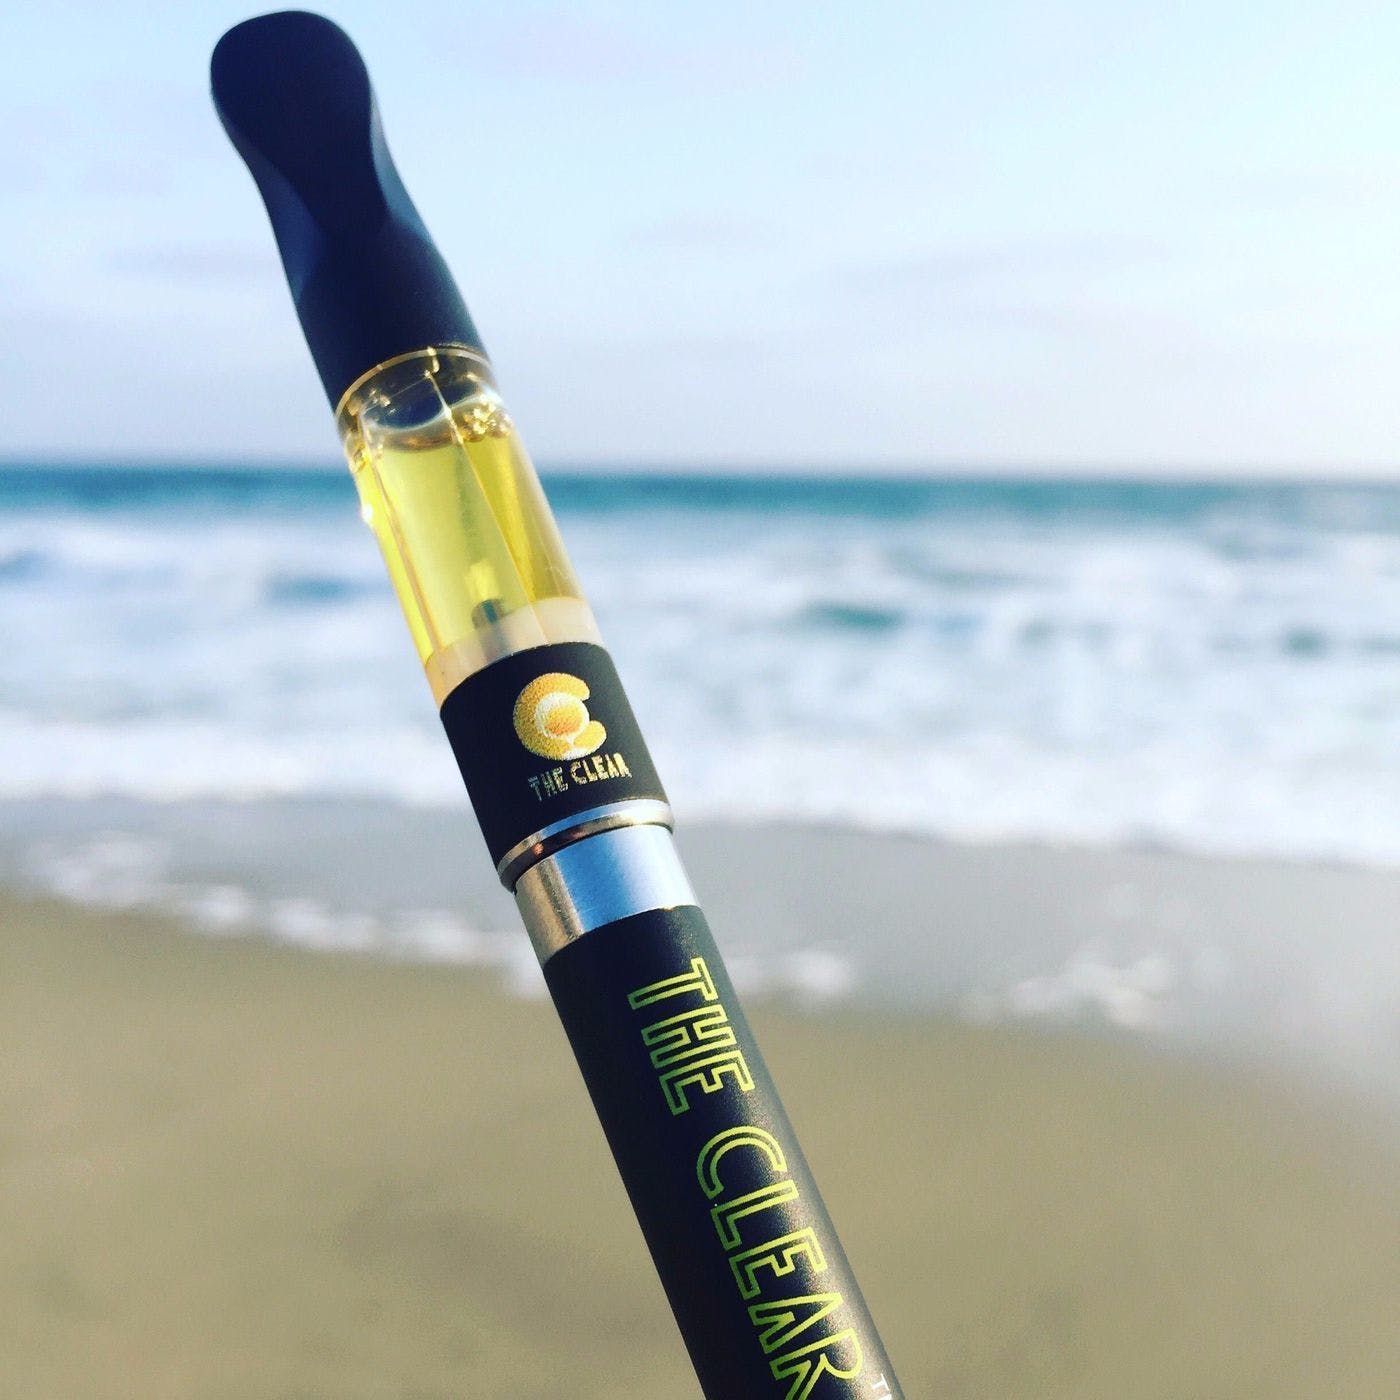 The Clear Classic Cartridges 500 mg